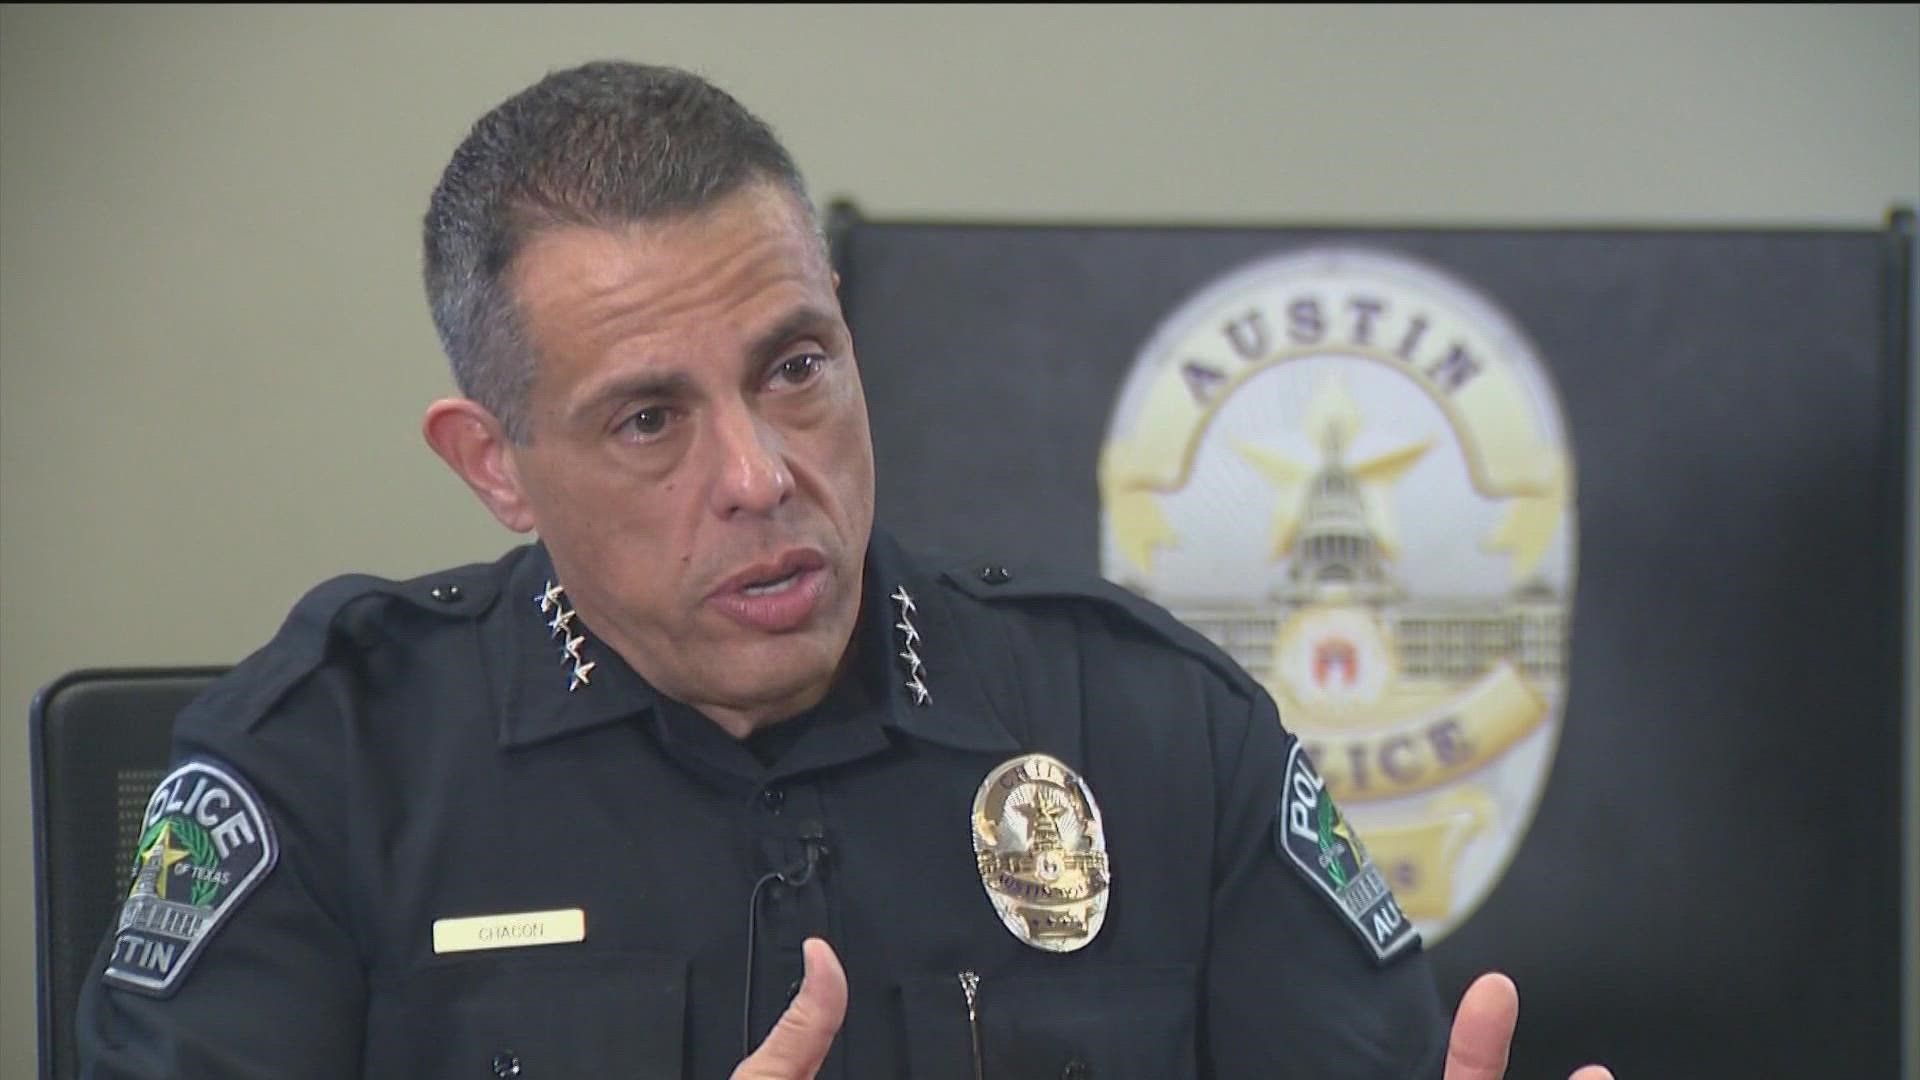 Austin Police Chief Joe Chacon is nearing a decision about whether any officer will be disciplined for the shooting.